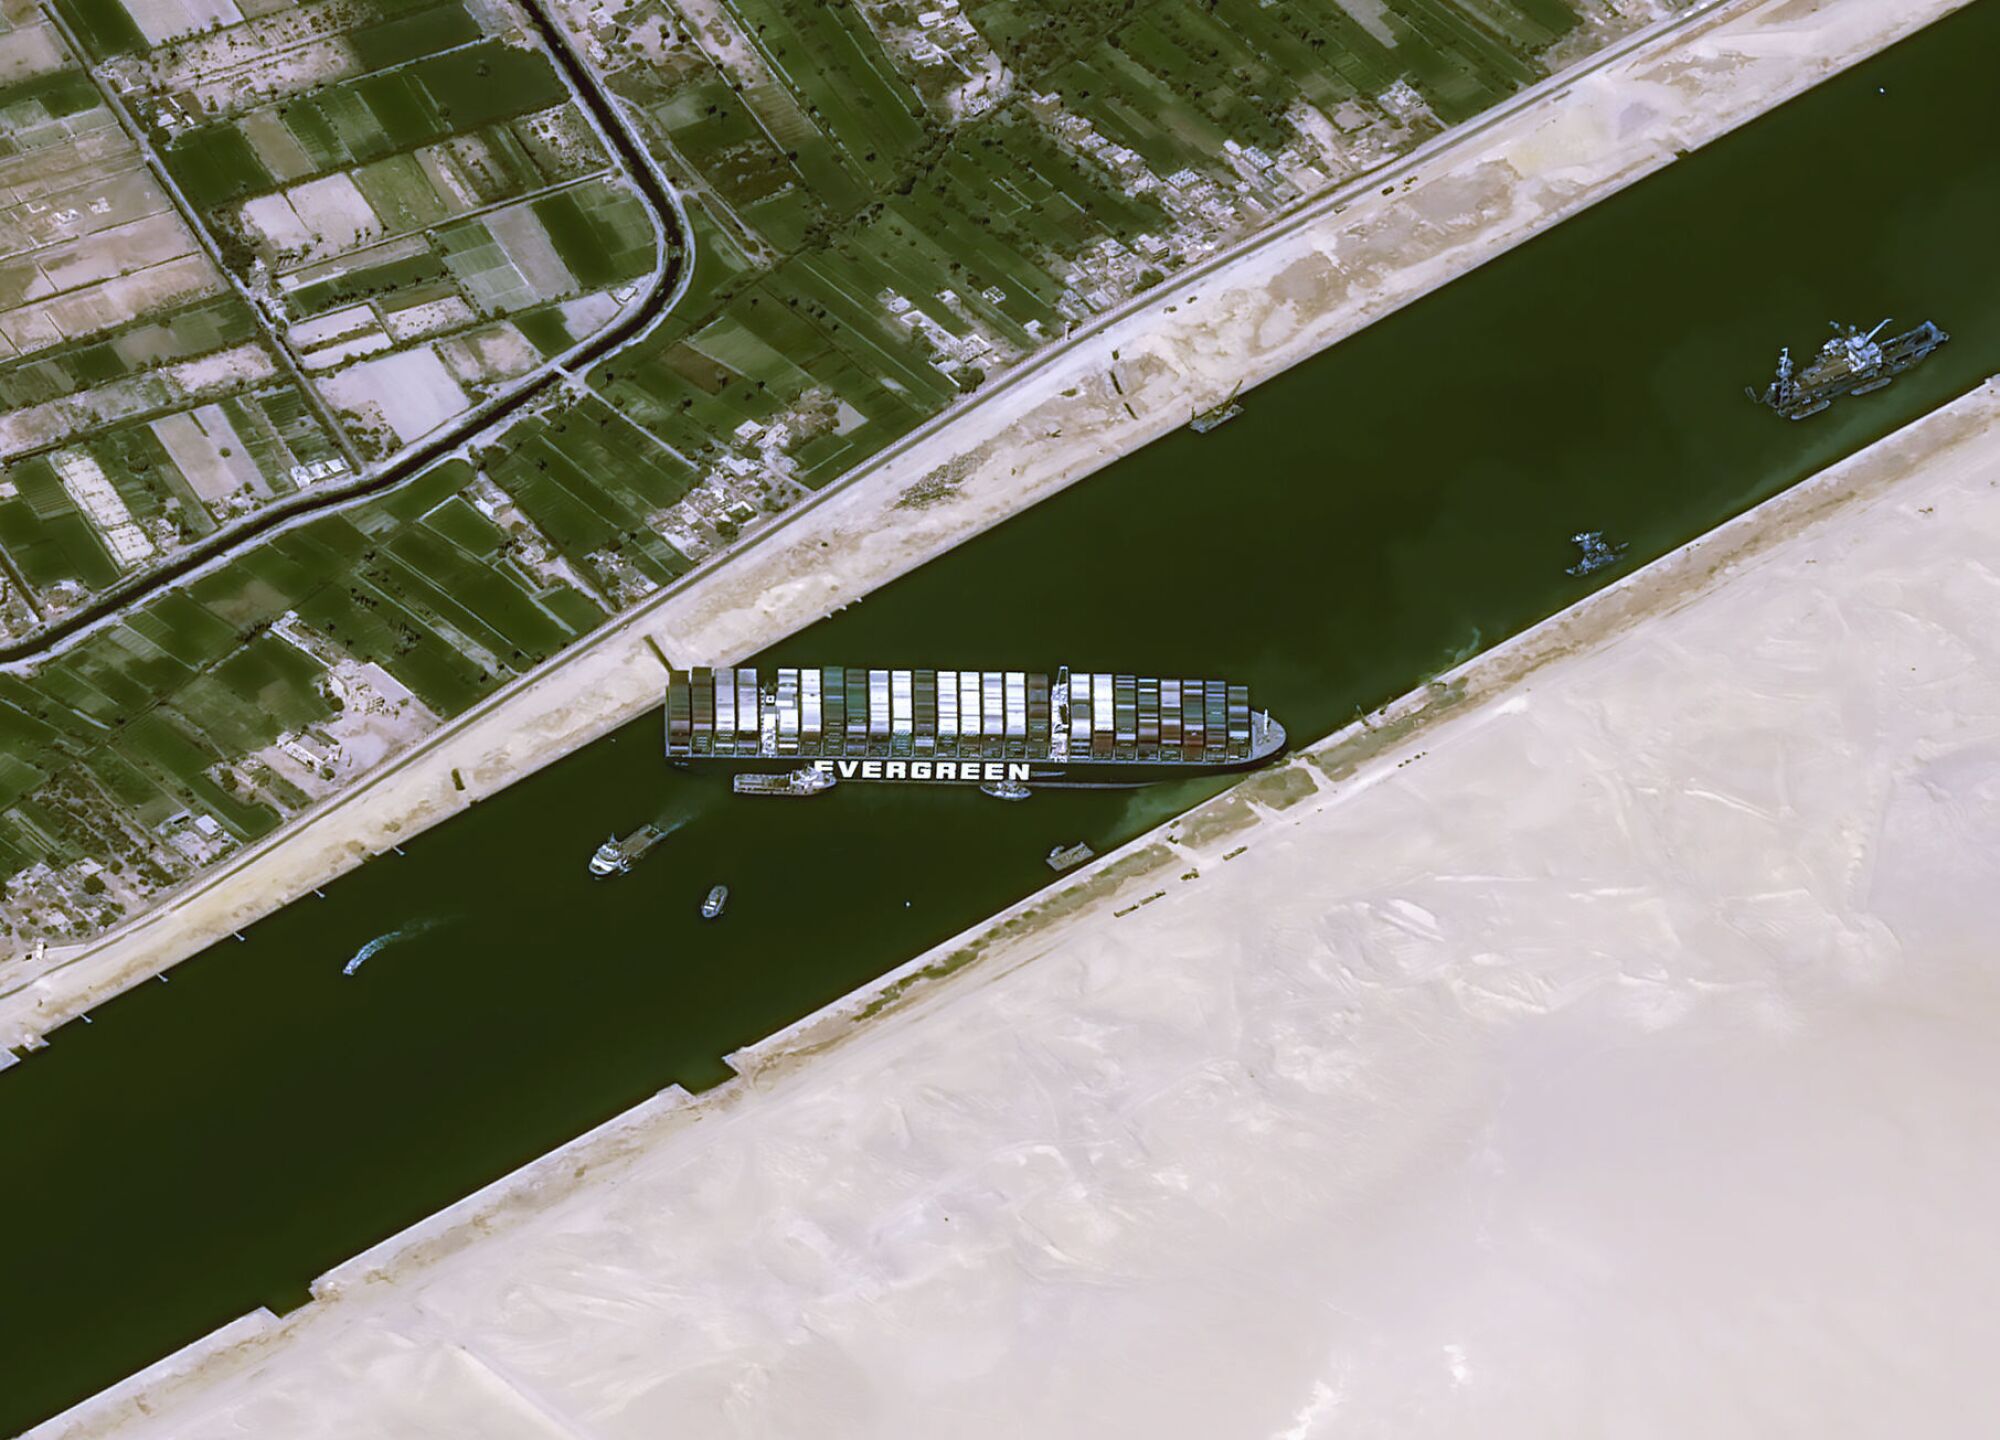 A satellite image shows the Ever Given stuck in the Suez Canal on March 25.